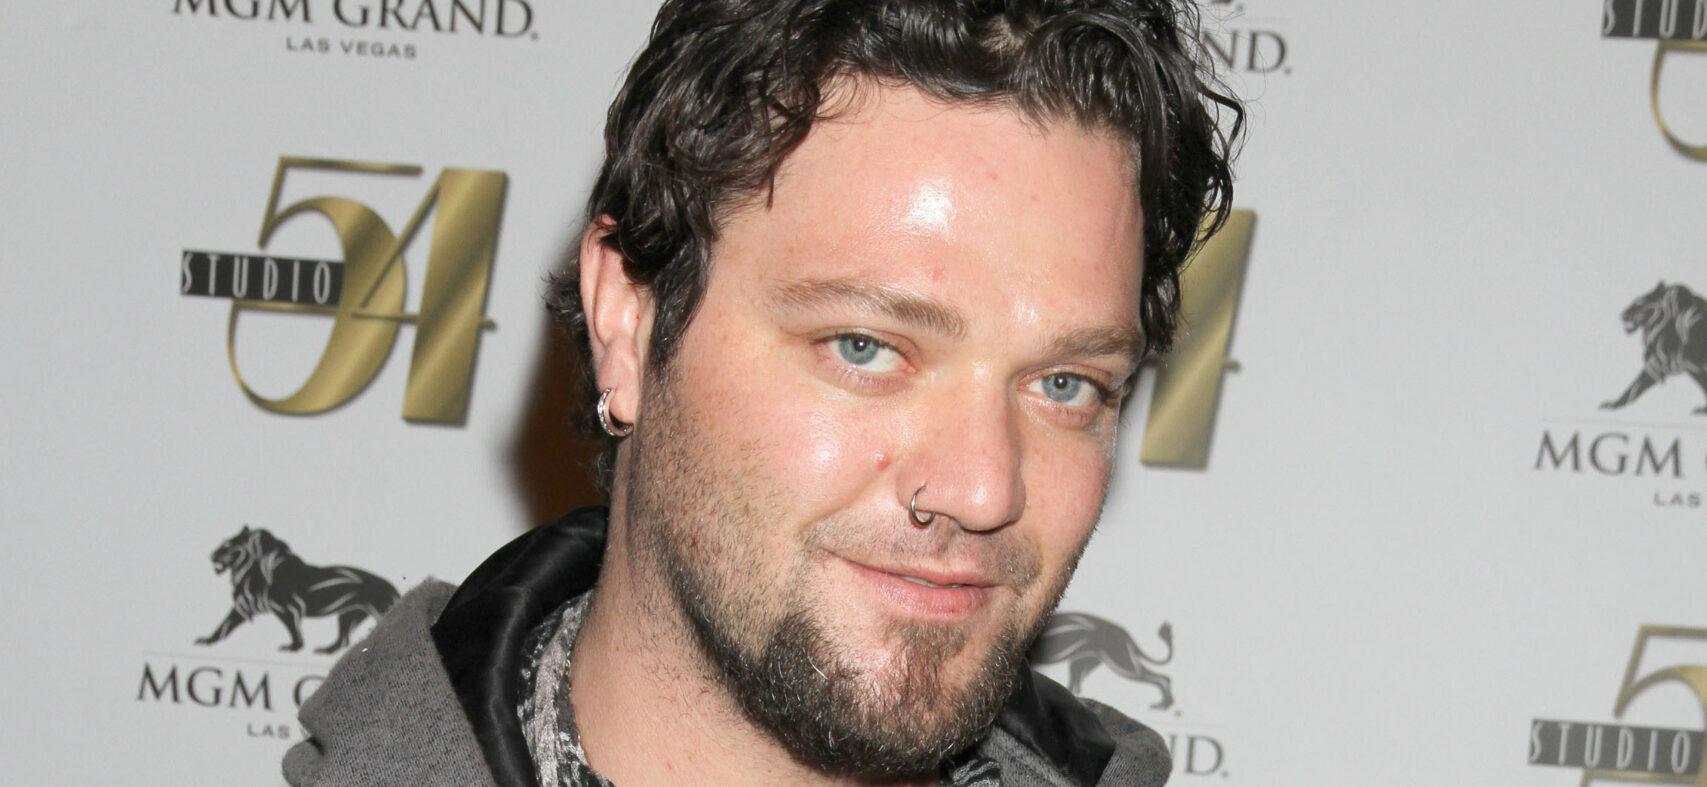 Bam Margera Honors Son Phoenix With New Face Ink Amid Legal Battle With Estranged Wife